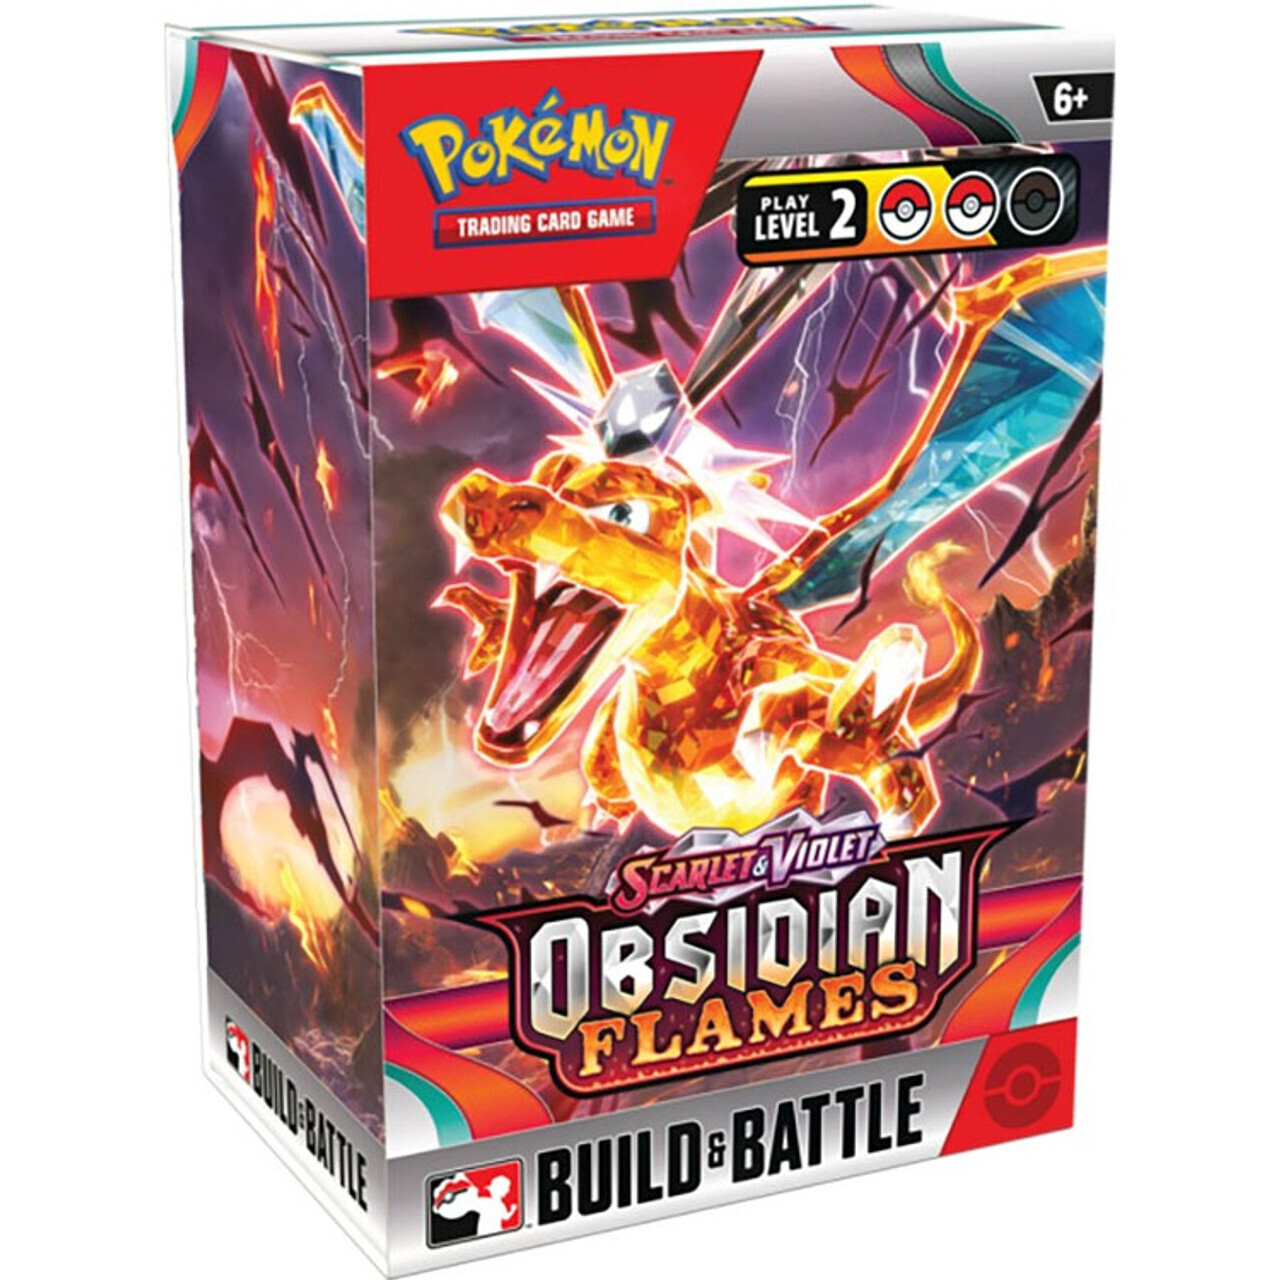 Pokemon: Obsidian Flame Build And Battle Box